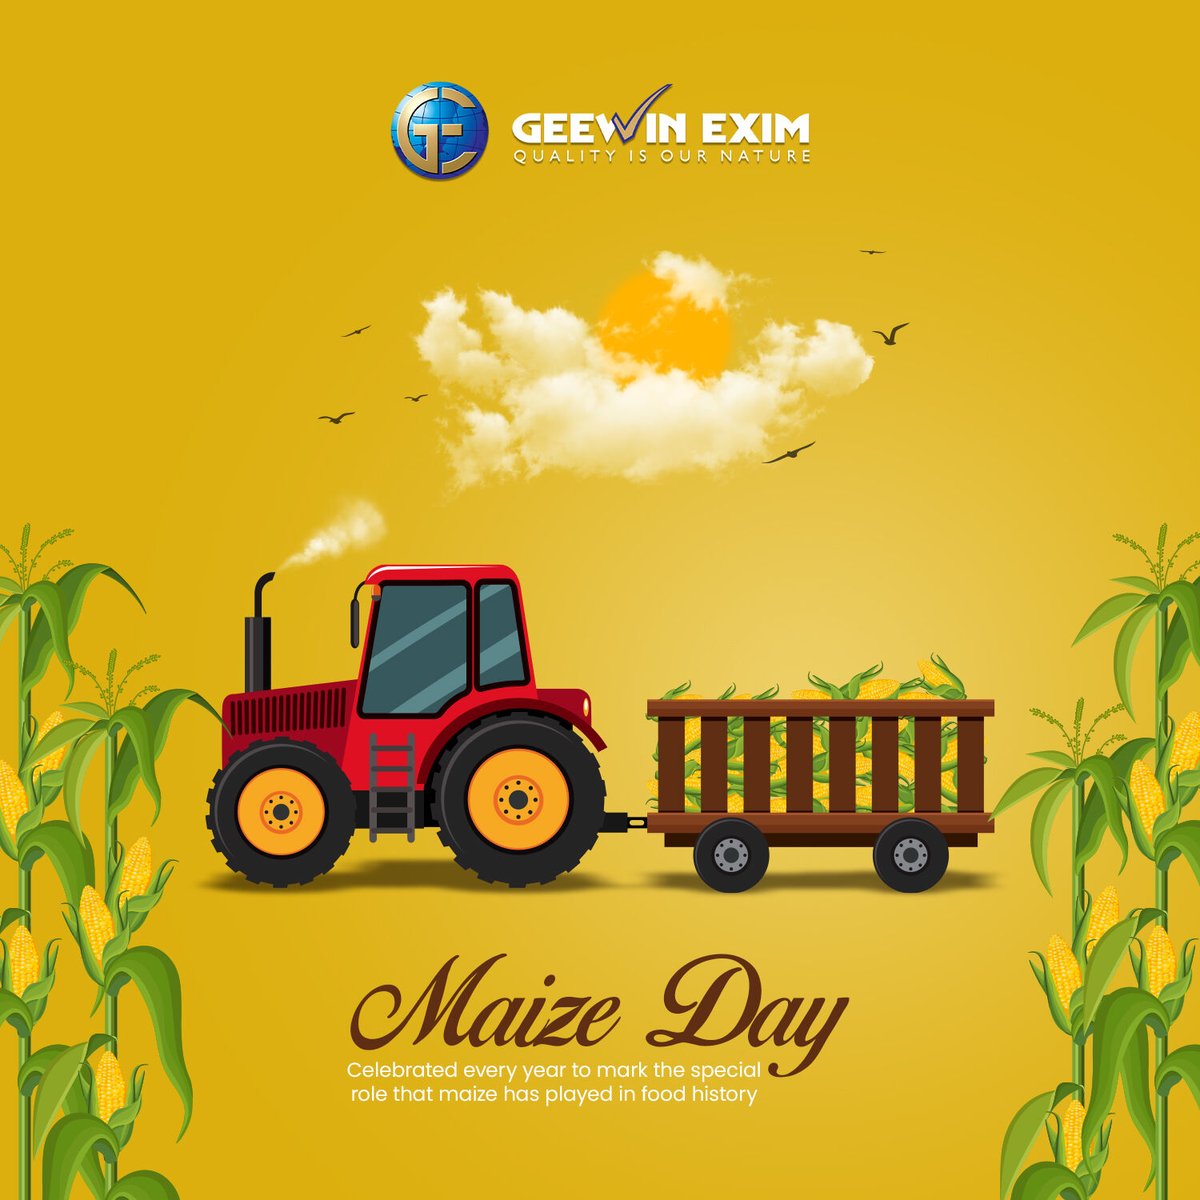 A Happy Maize Day wishes to everyone. There is one maize food that we all love and that is pop corn and we should enjoy it to the fullest.

#geewinexim #maizeday #maize #maizeprocessing #MaizeMagic #agriculture #whitecorn #yellowcorn #zeamays #snowcorn #buttercorn